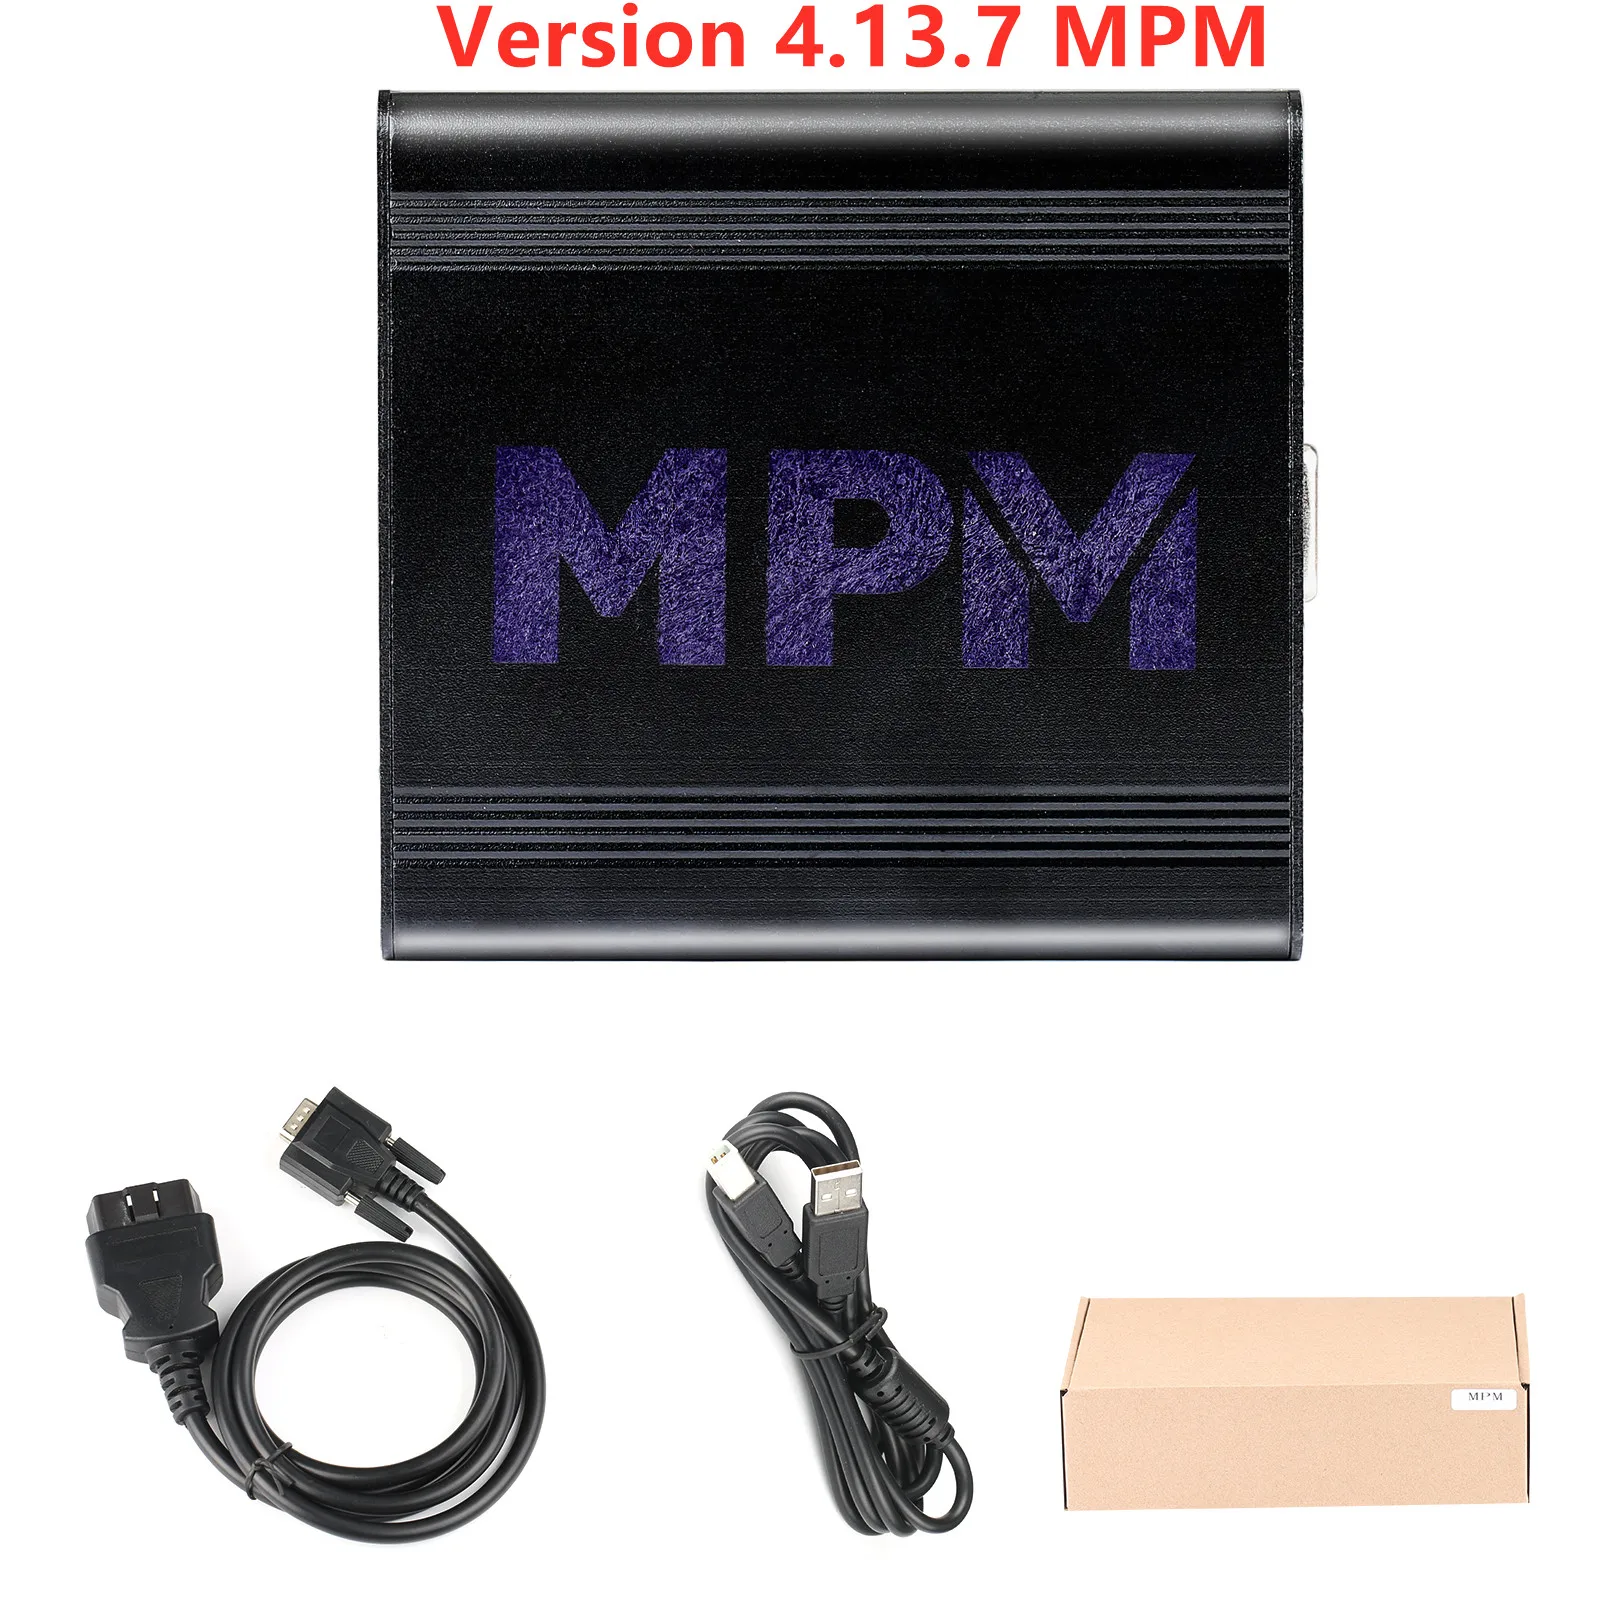 

Version 4.13.7 MPM OTG ECU TCU Chip Tuning Programming Tool with VCM Suite from PCMTuner Team for American Car ECUs All in OBD